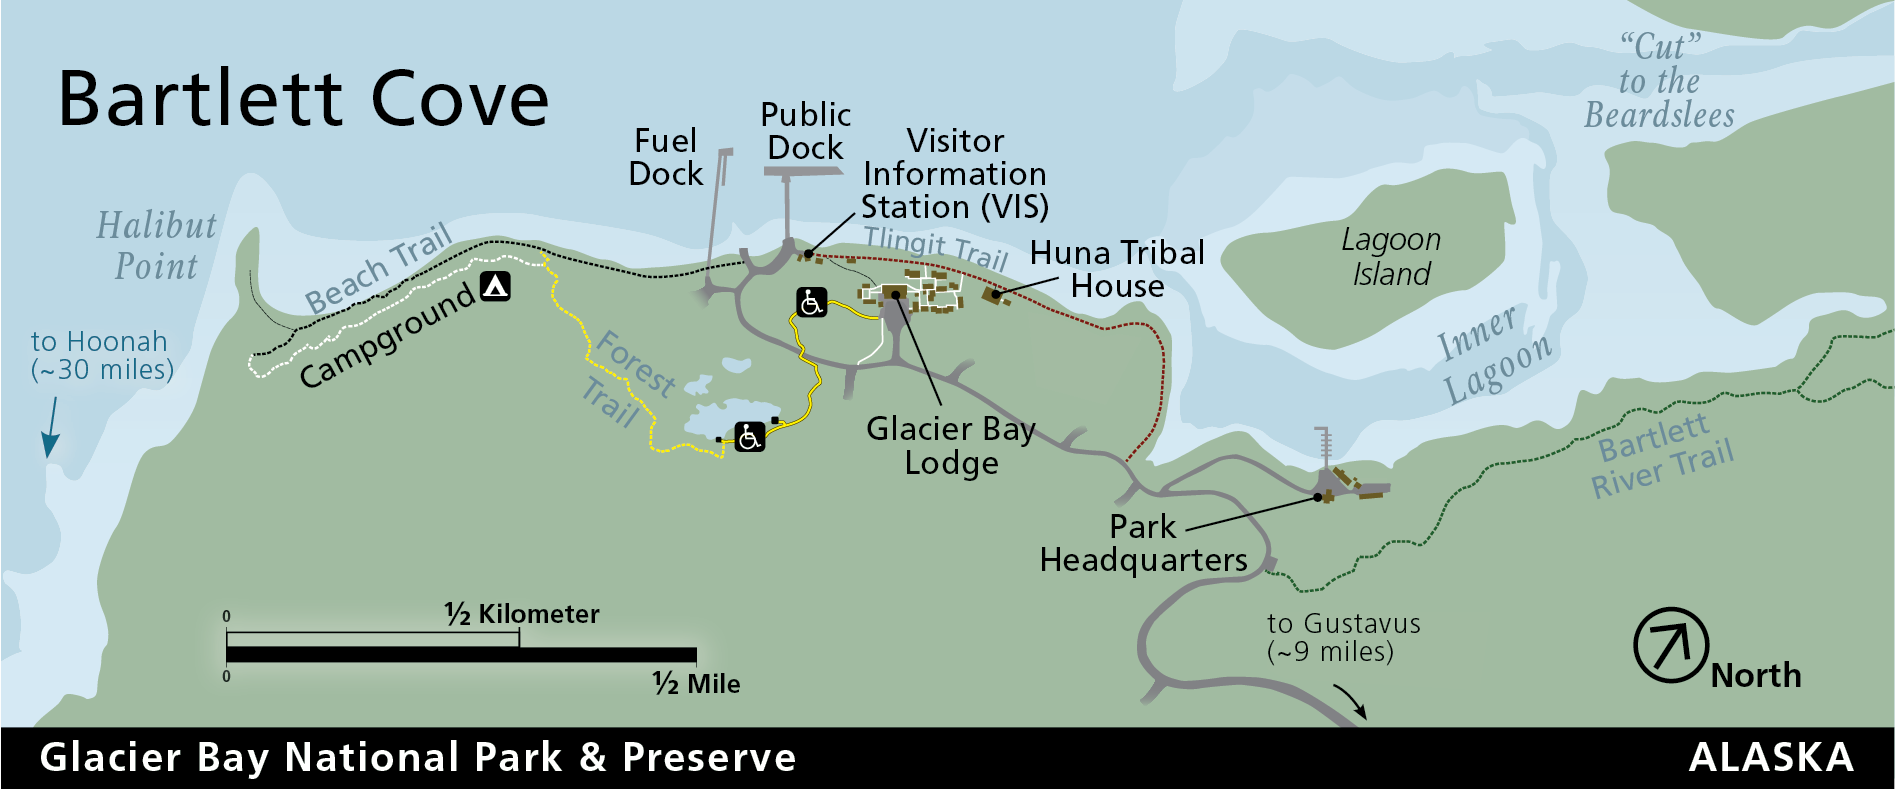 a map of Bartlett Cove Alaska showing campground on the left, hiking trail, Glacier Bay Lodge, dock area, visitor information, Huna Tribal House, and park headquarters.